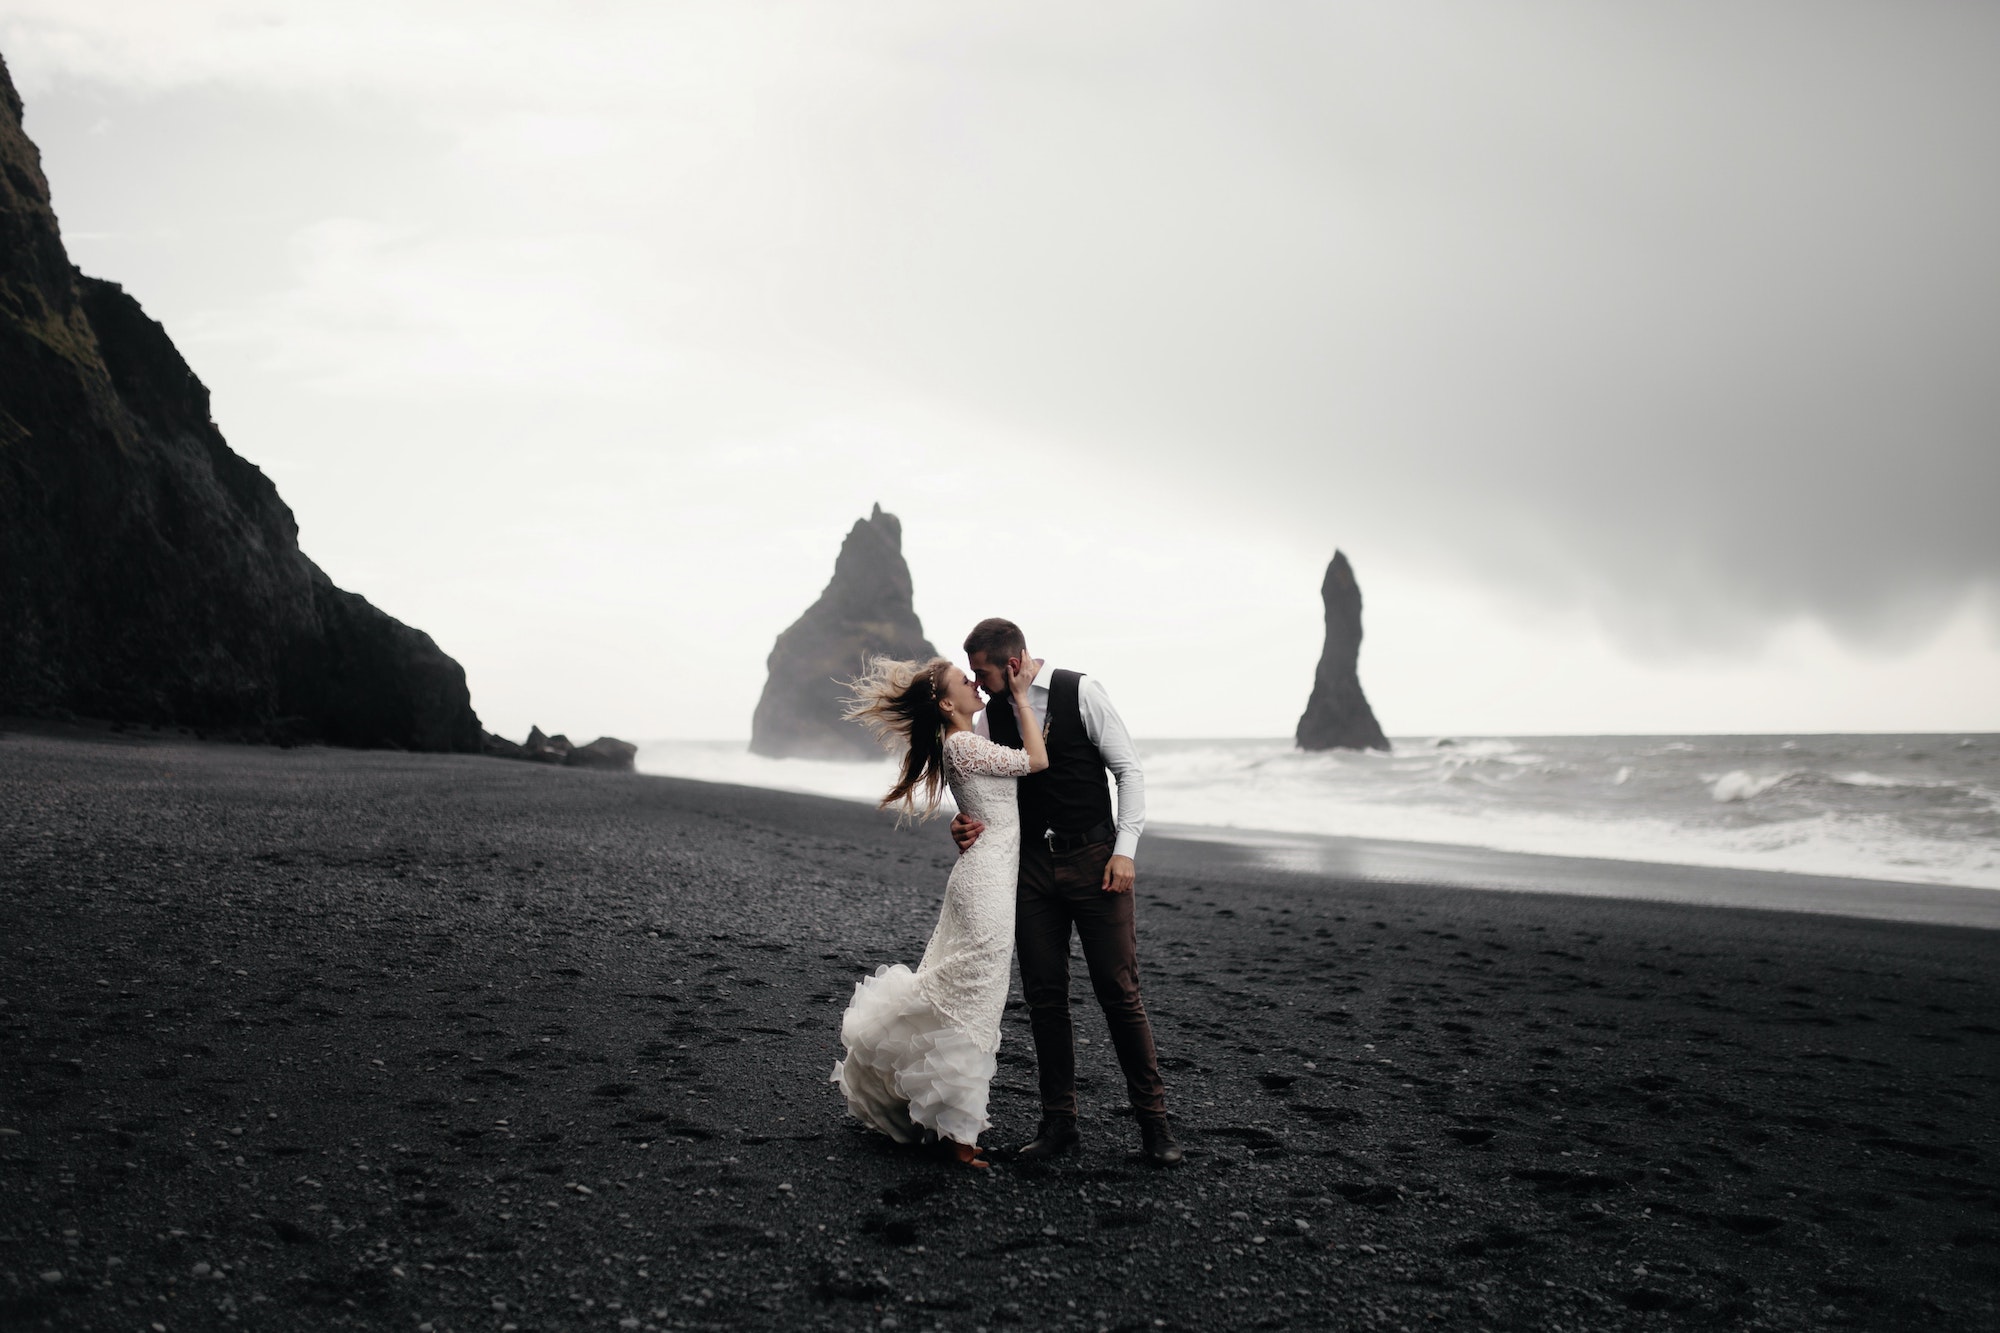 Couple in wedding dresses kissing on a beach on a windy day.